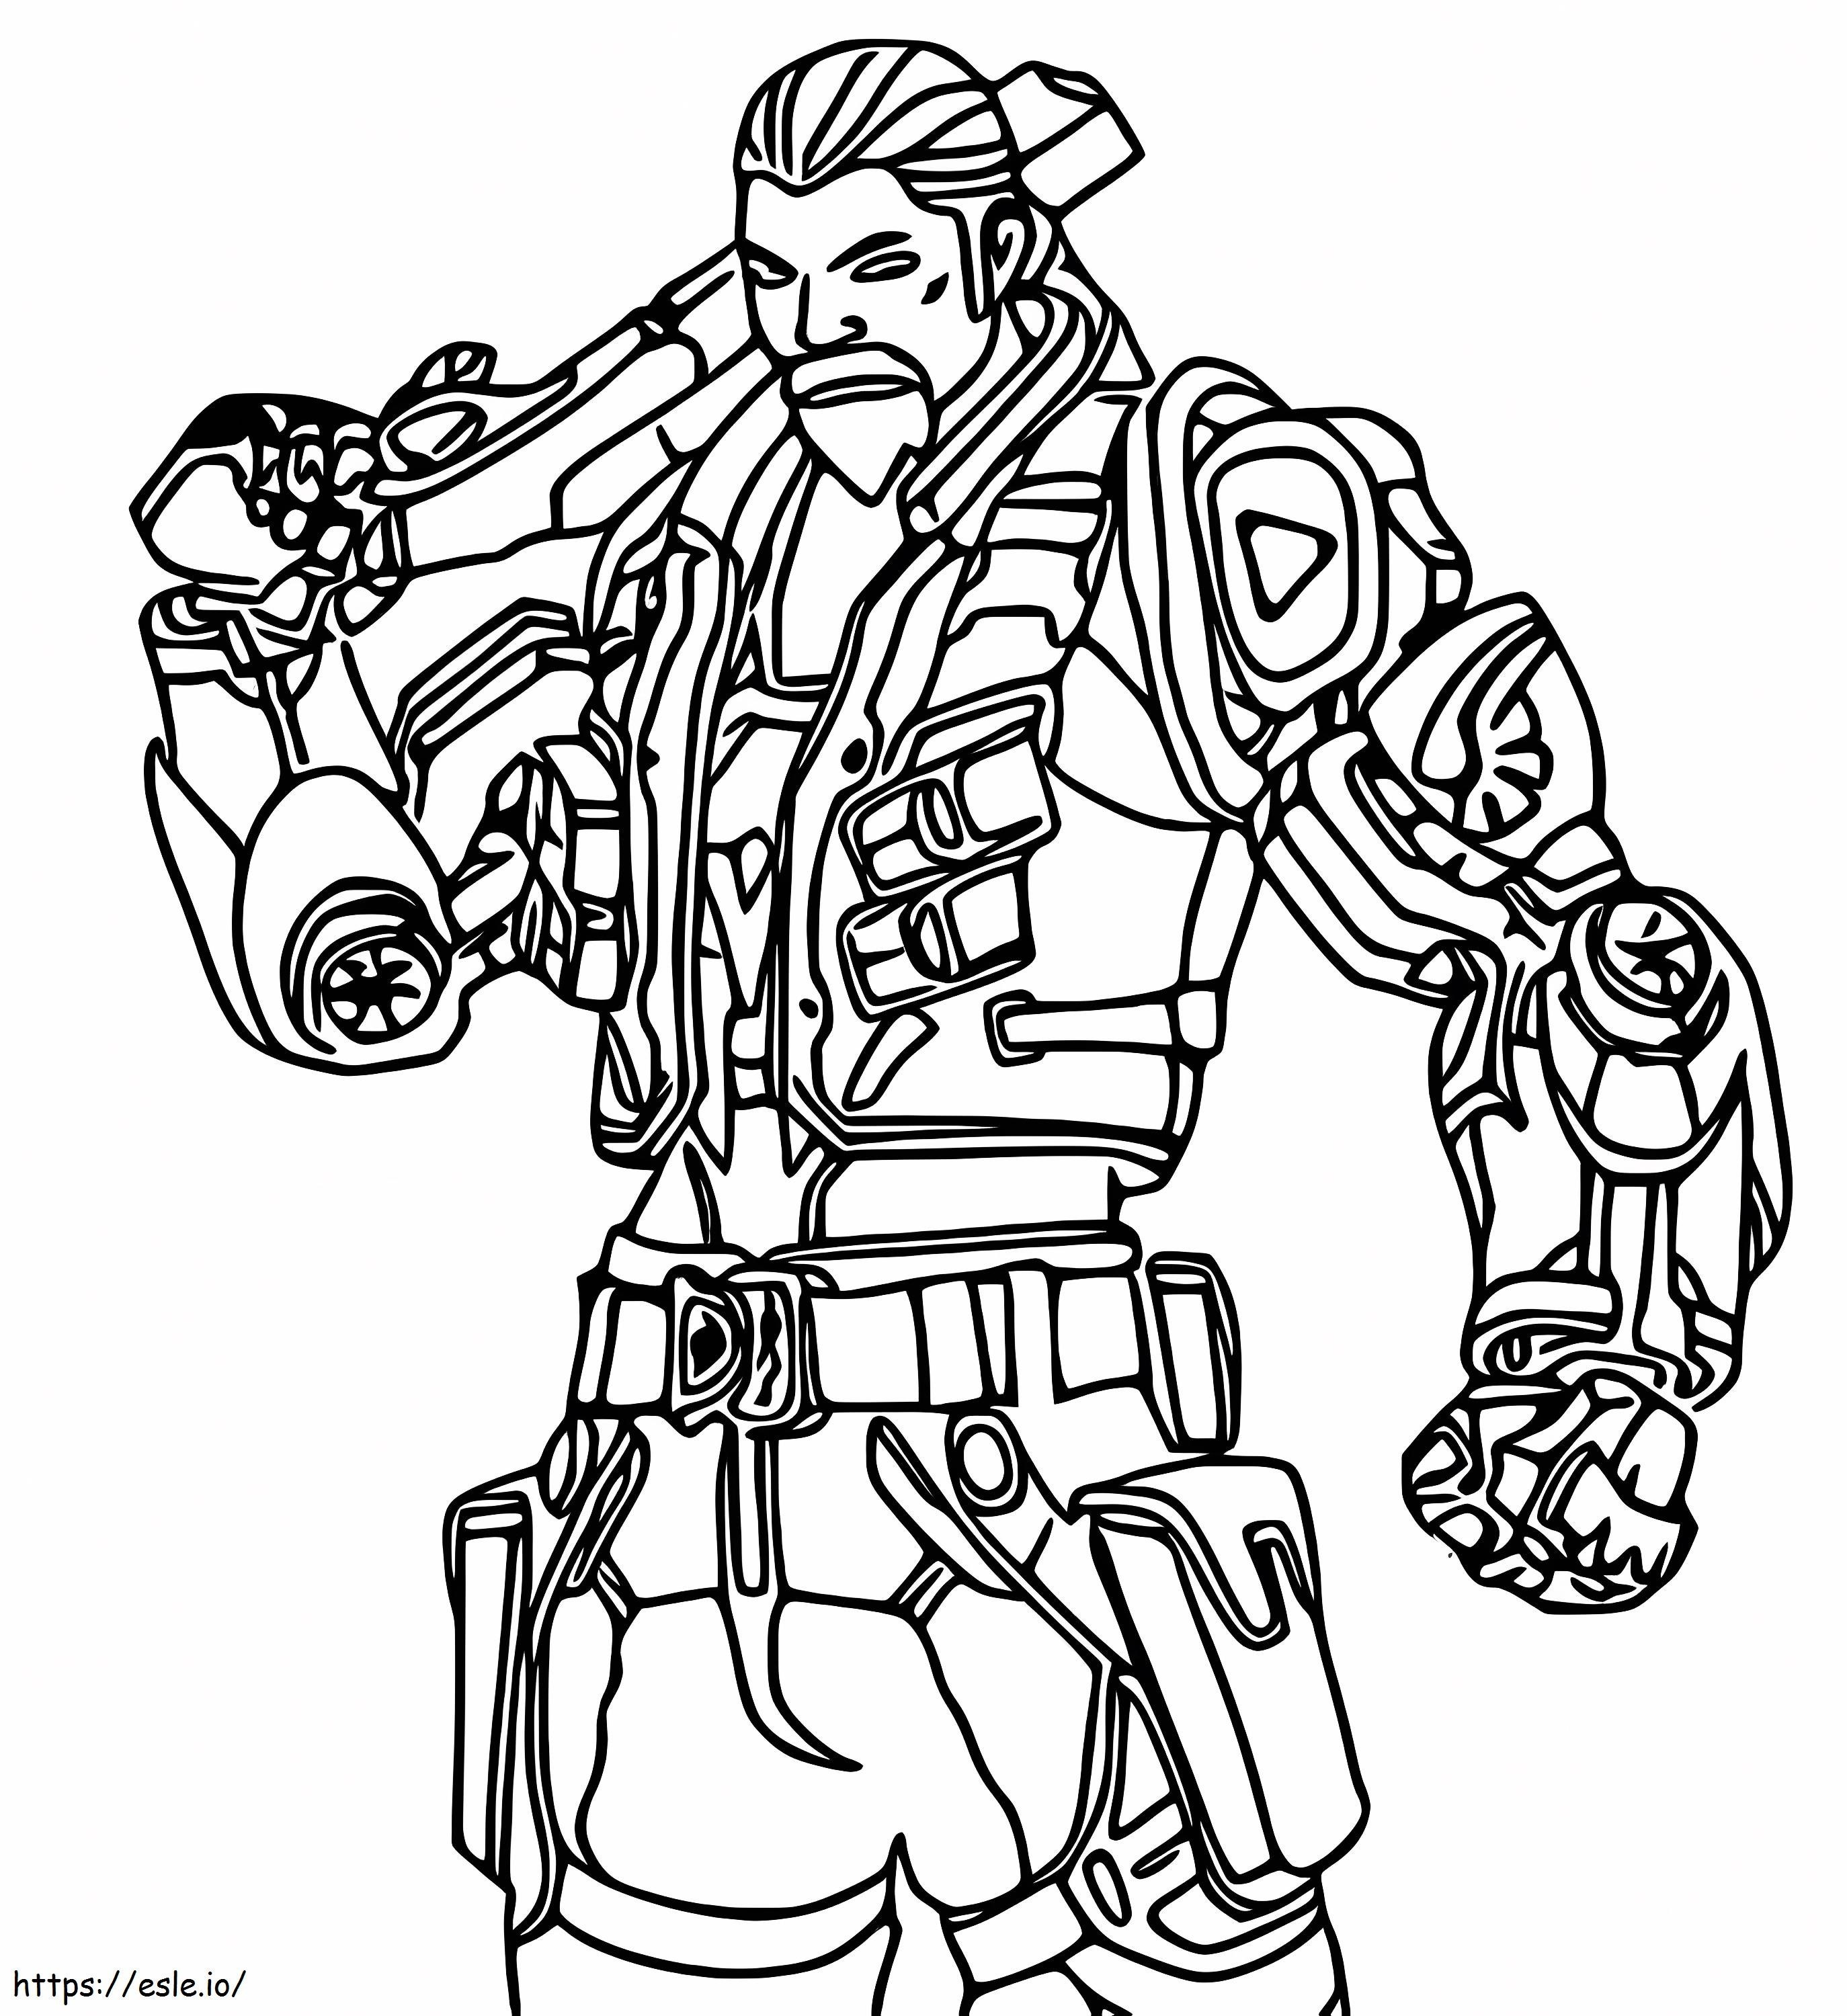 Breach From Valorant coloring page